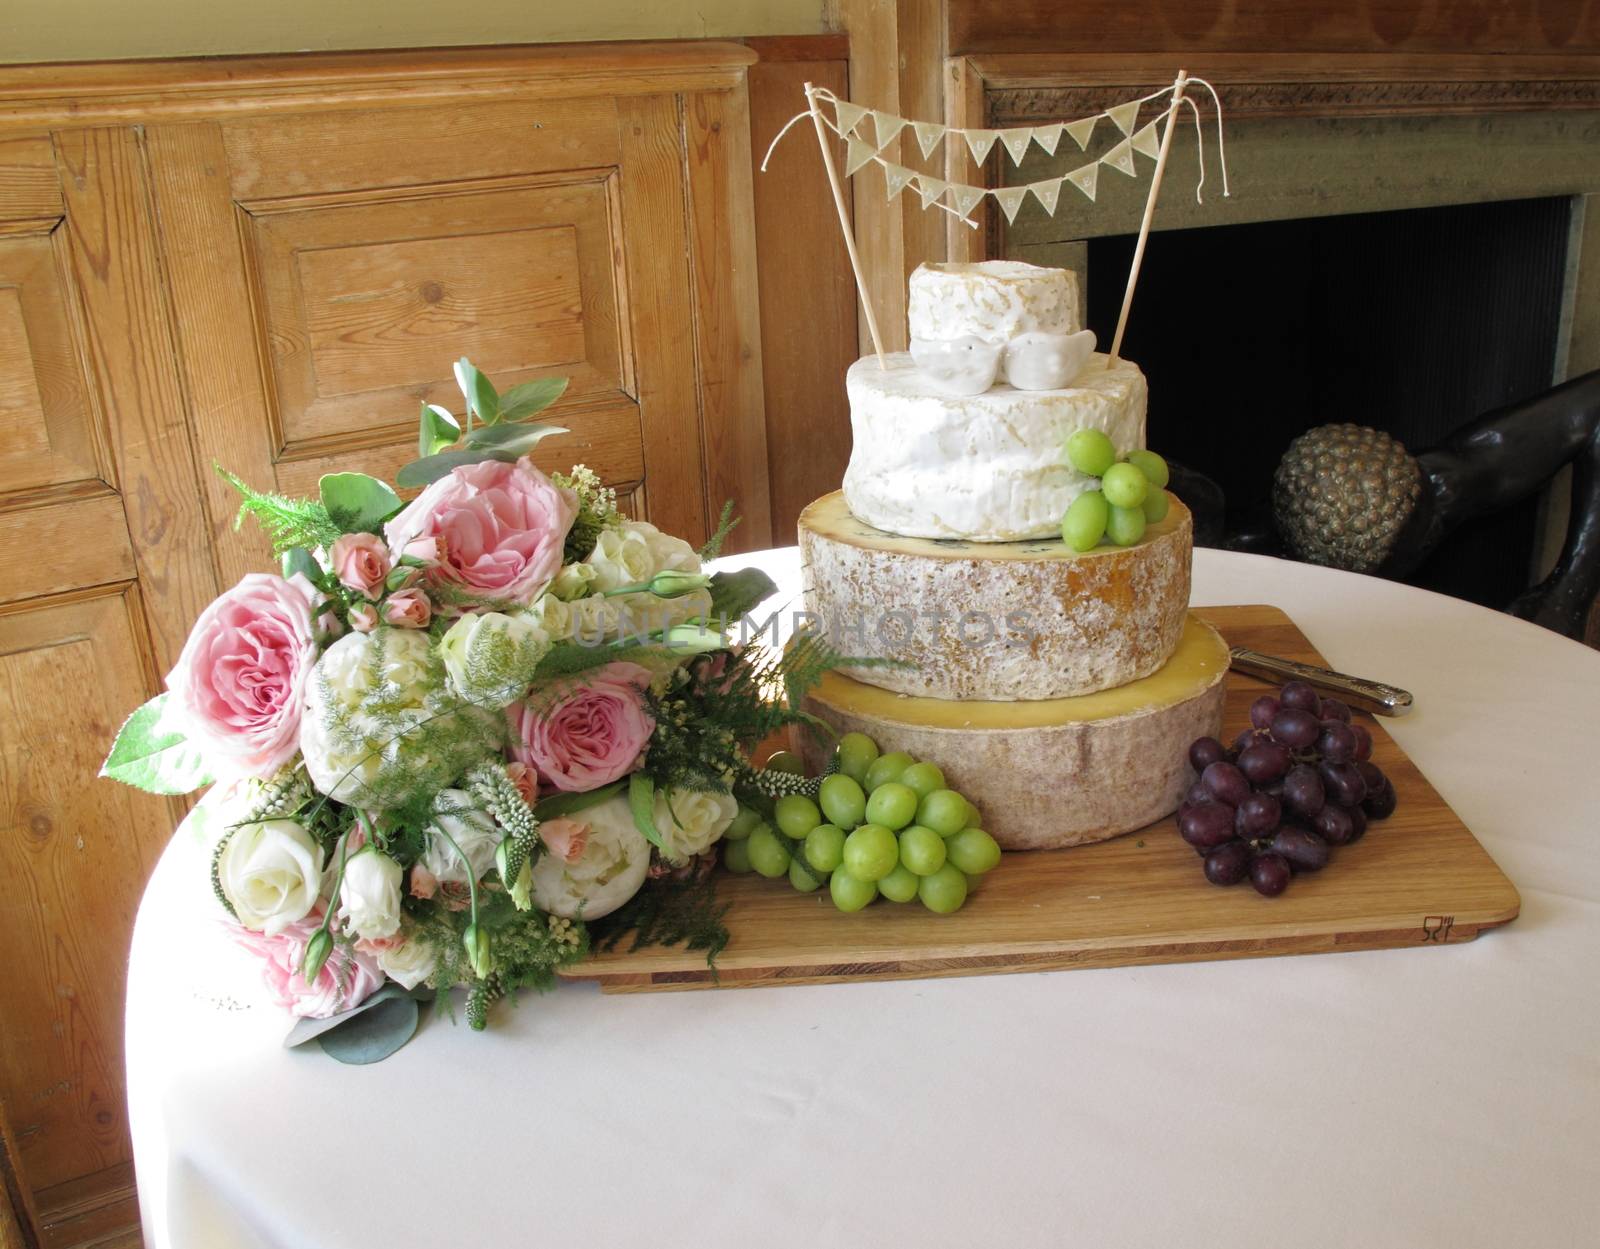 Cheese in shape of wedding cake